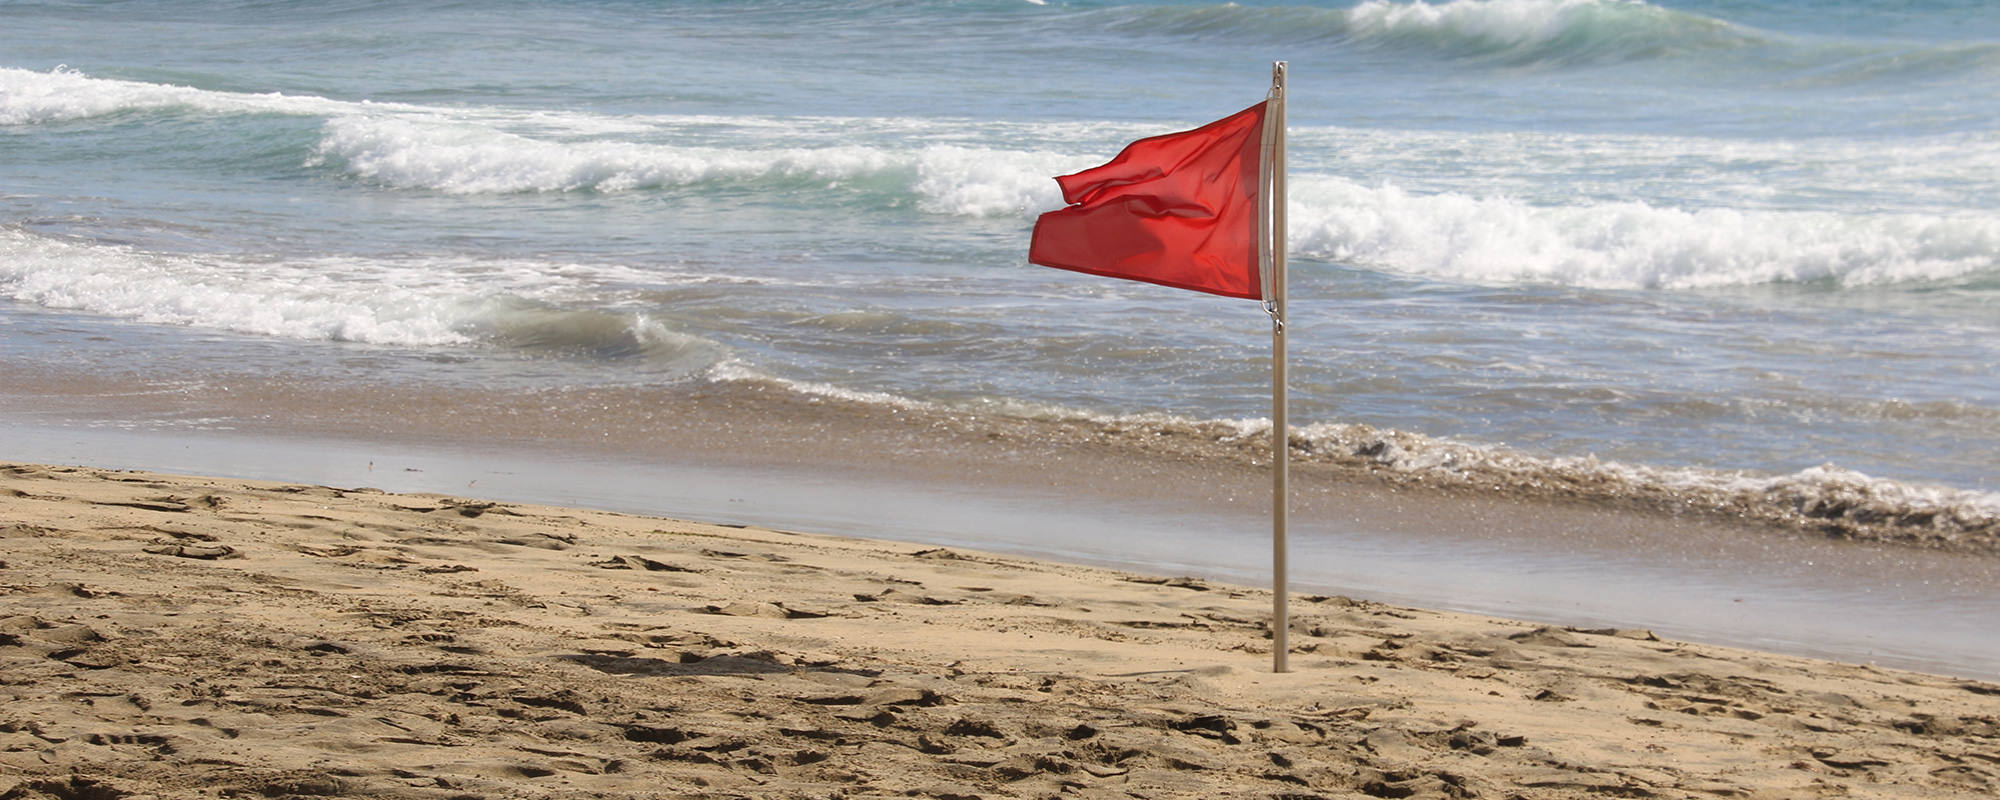 Strand mit roter Flagge